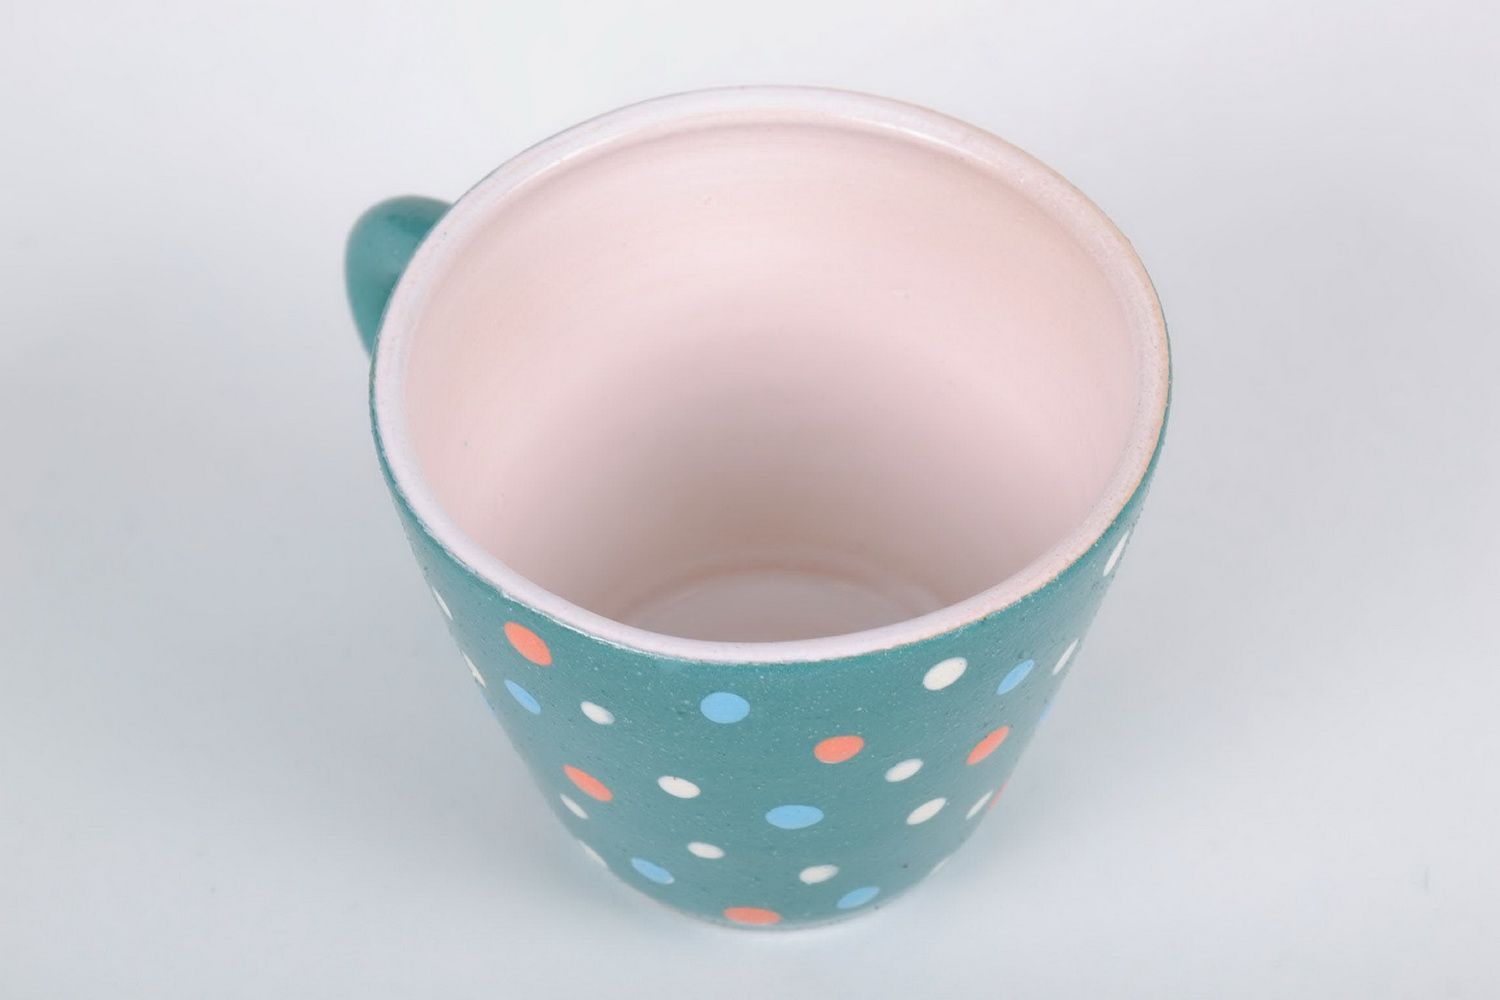 Turquoise porcelain cup with multi-colored dots photo 4